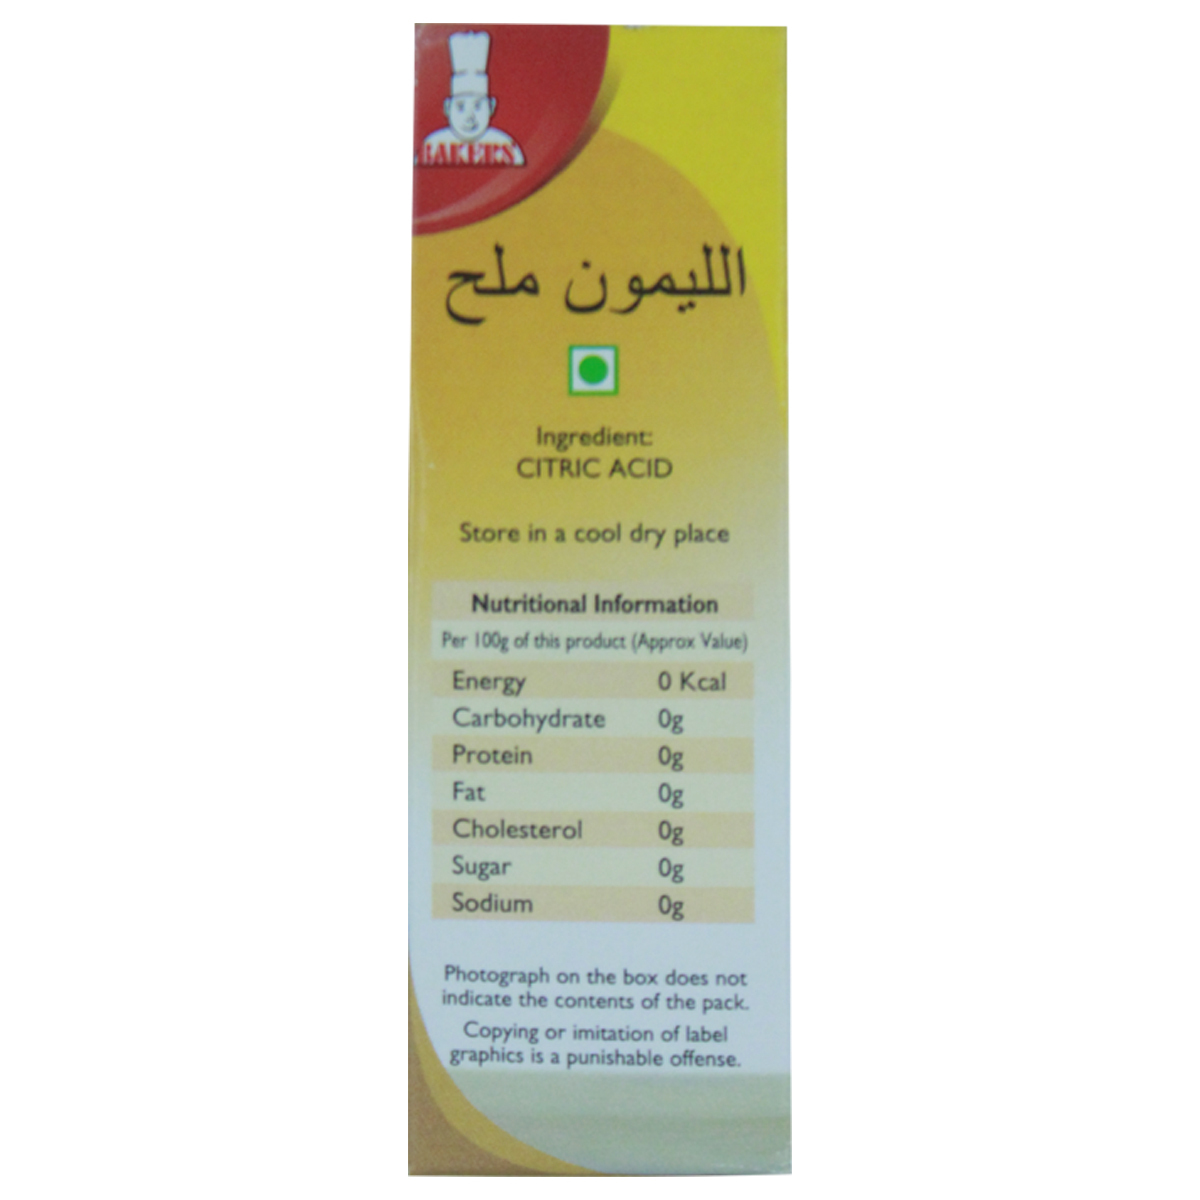 Bakers Citric Acid 50g